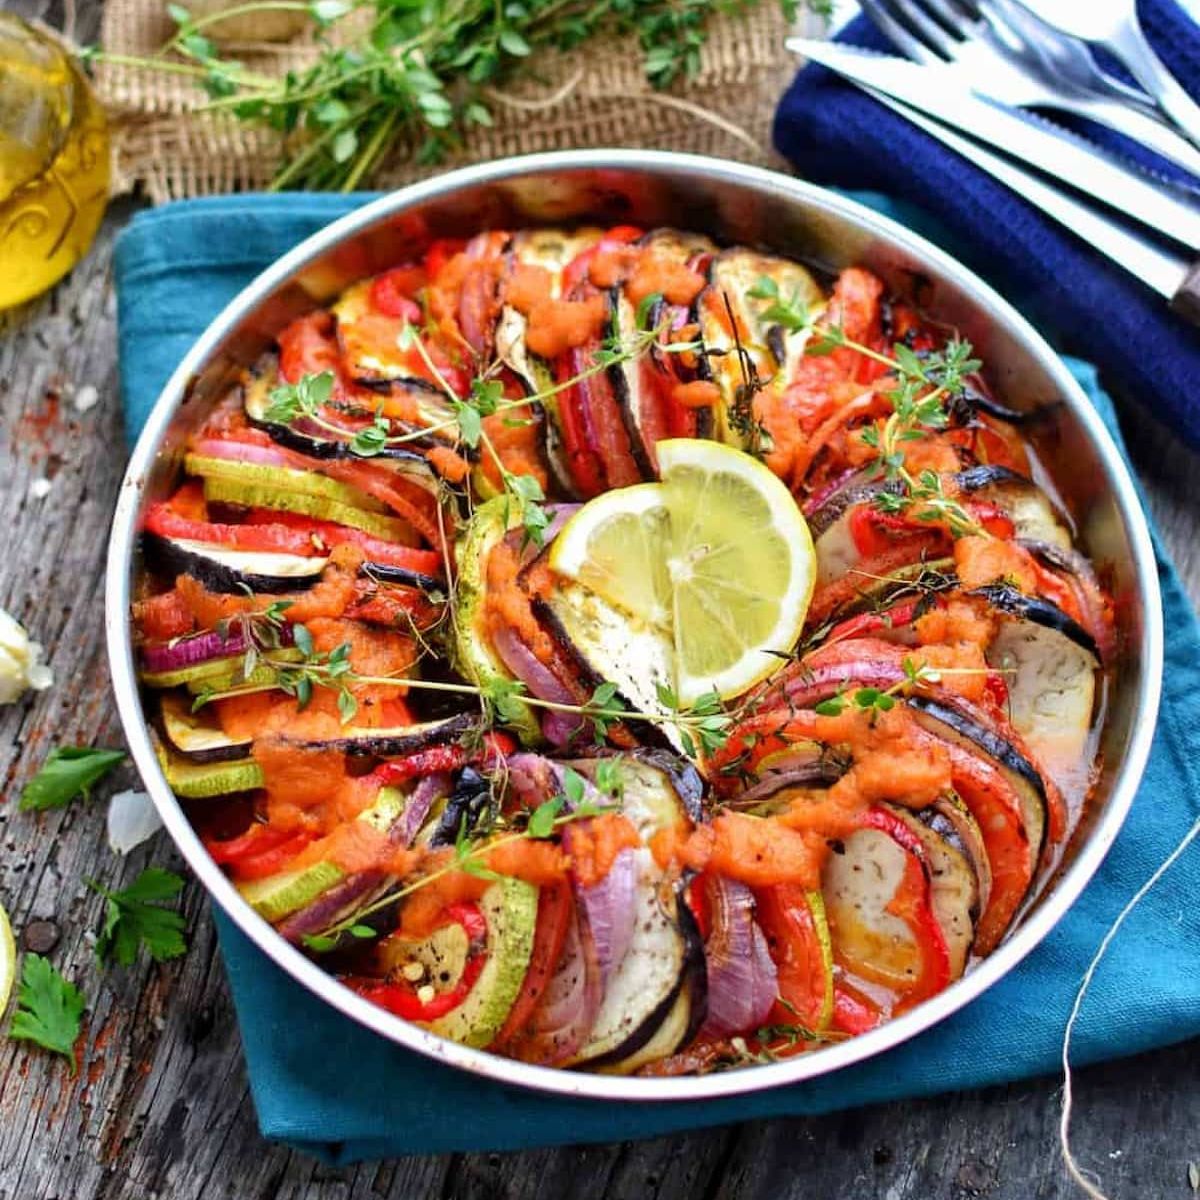 Ratatouille, garnished with lemon slices and herbs.